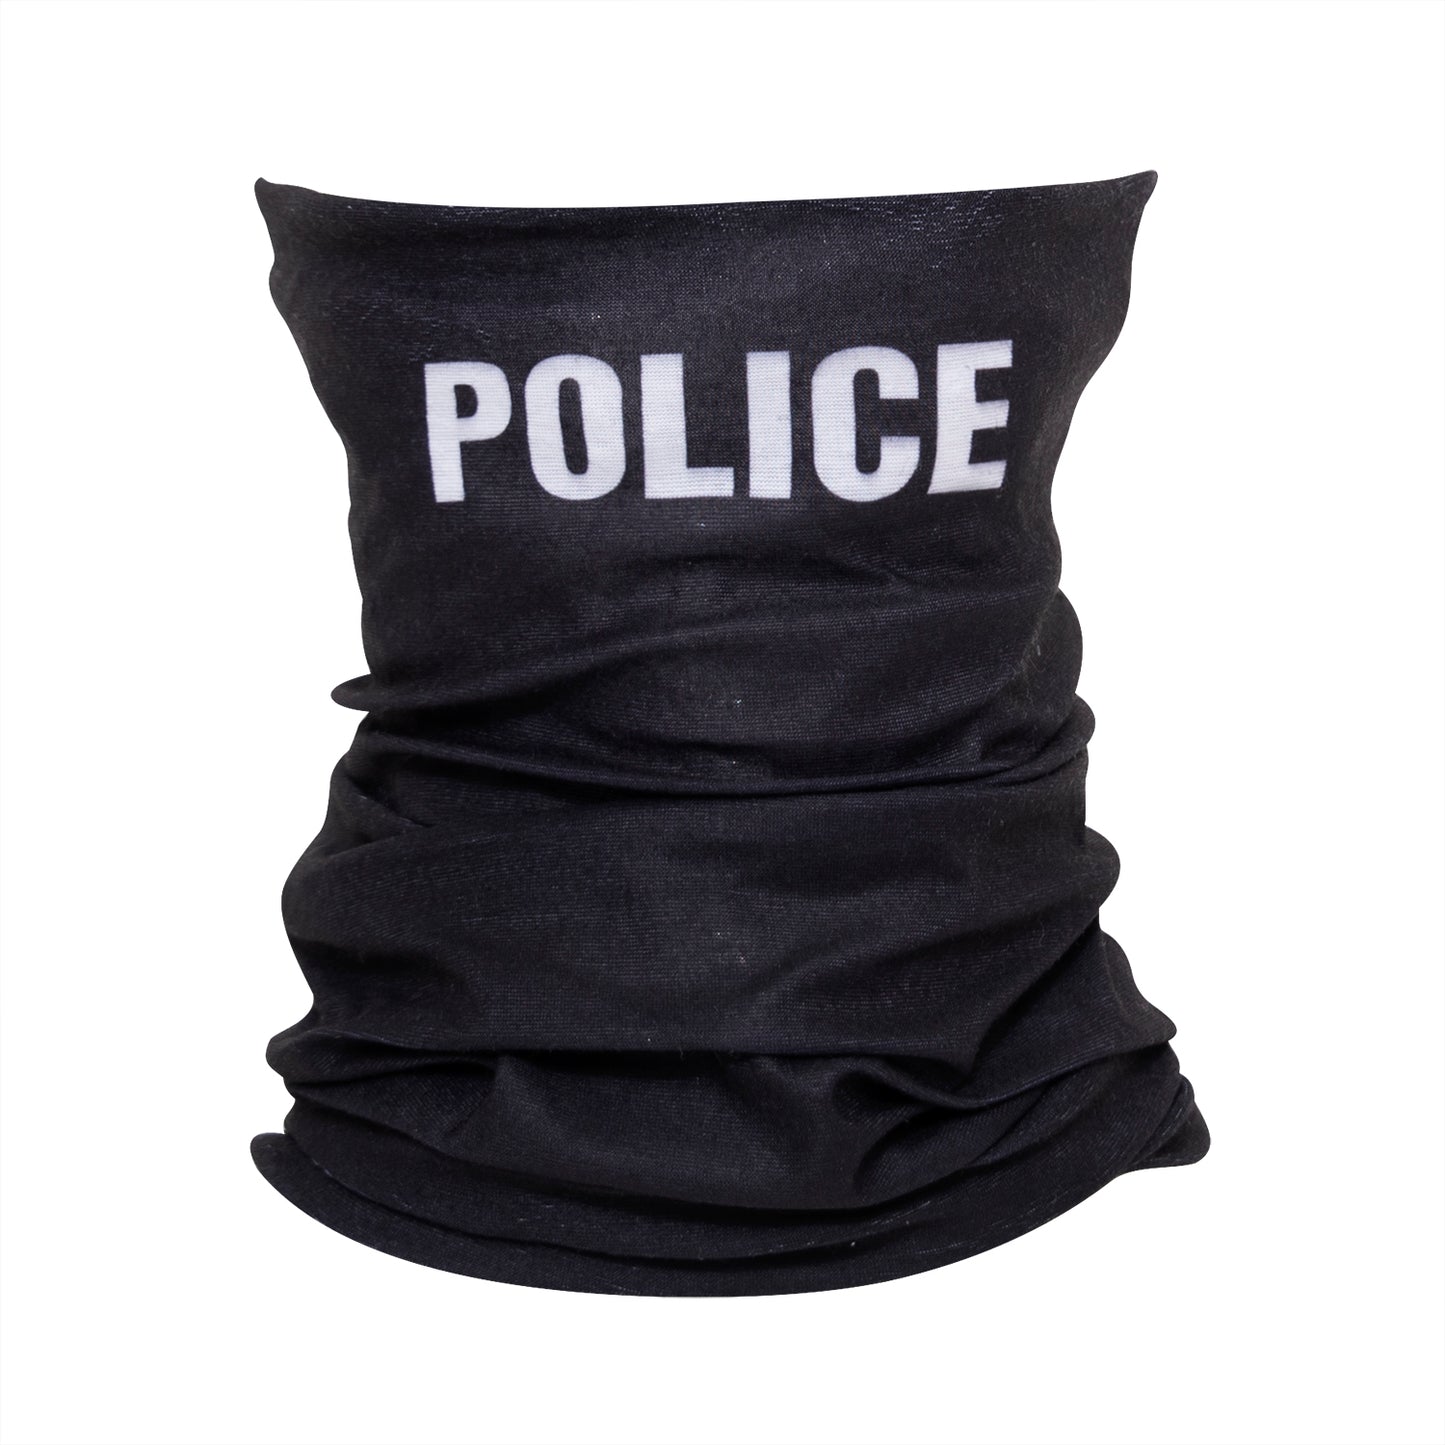 Rothco’s adaptable Multi-Use Tactical Wrap featuring a Police print has over a dozen applications and can be worn as a neck gaiter, bandana face covering, balaclava, headwrap, and more while on the job. www.defenceqstore.com.au